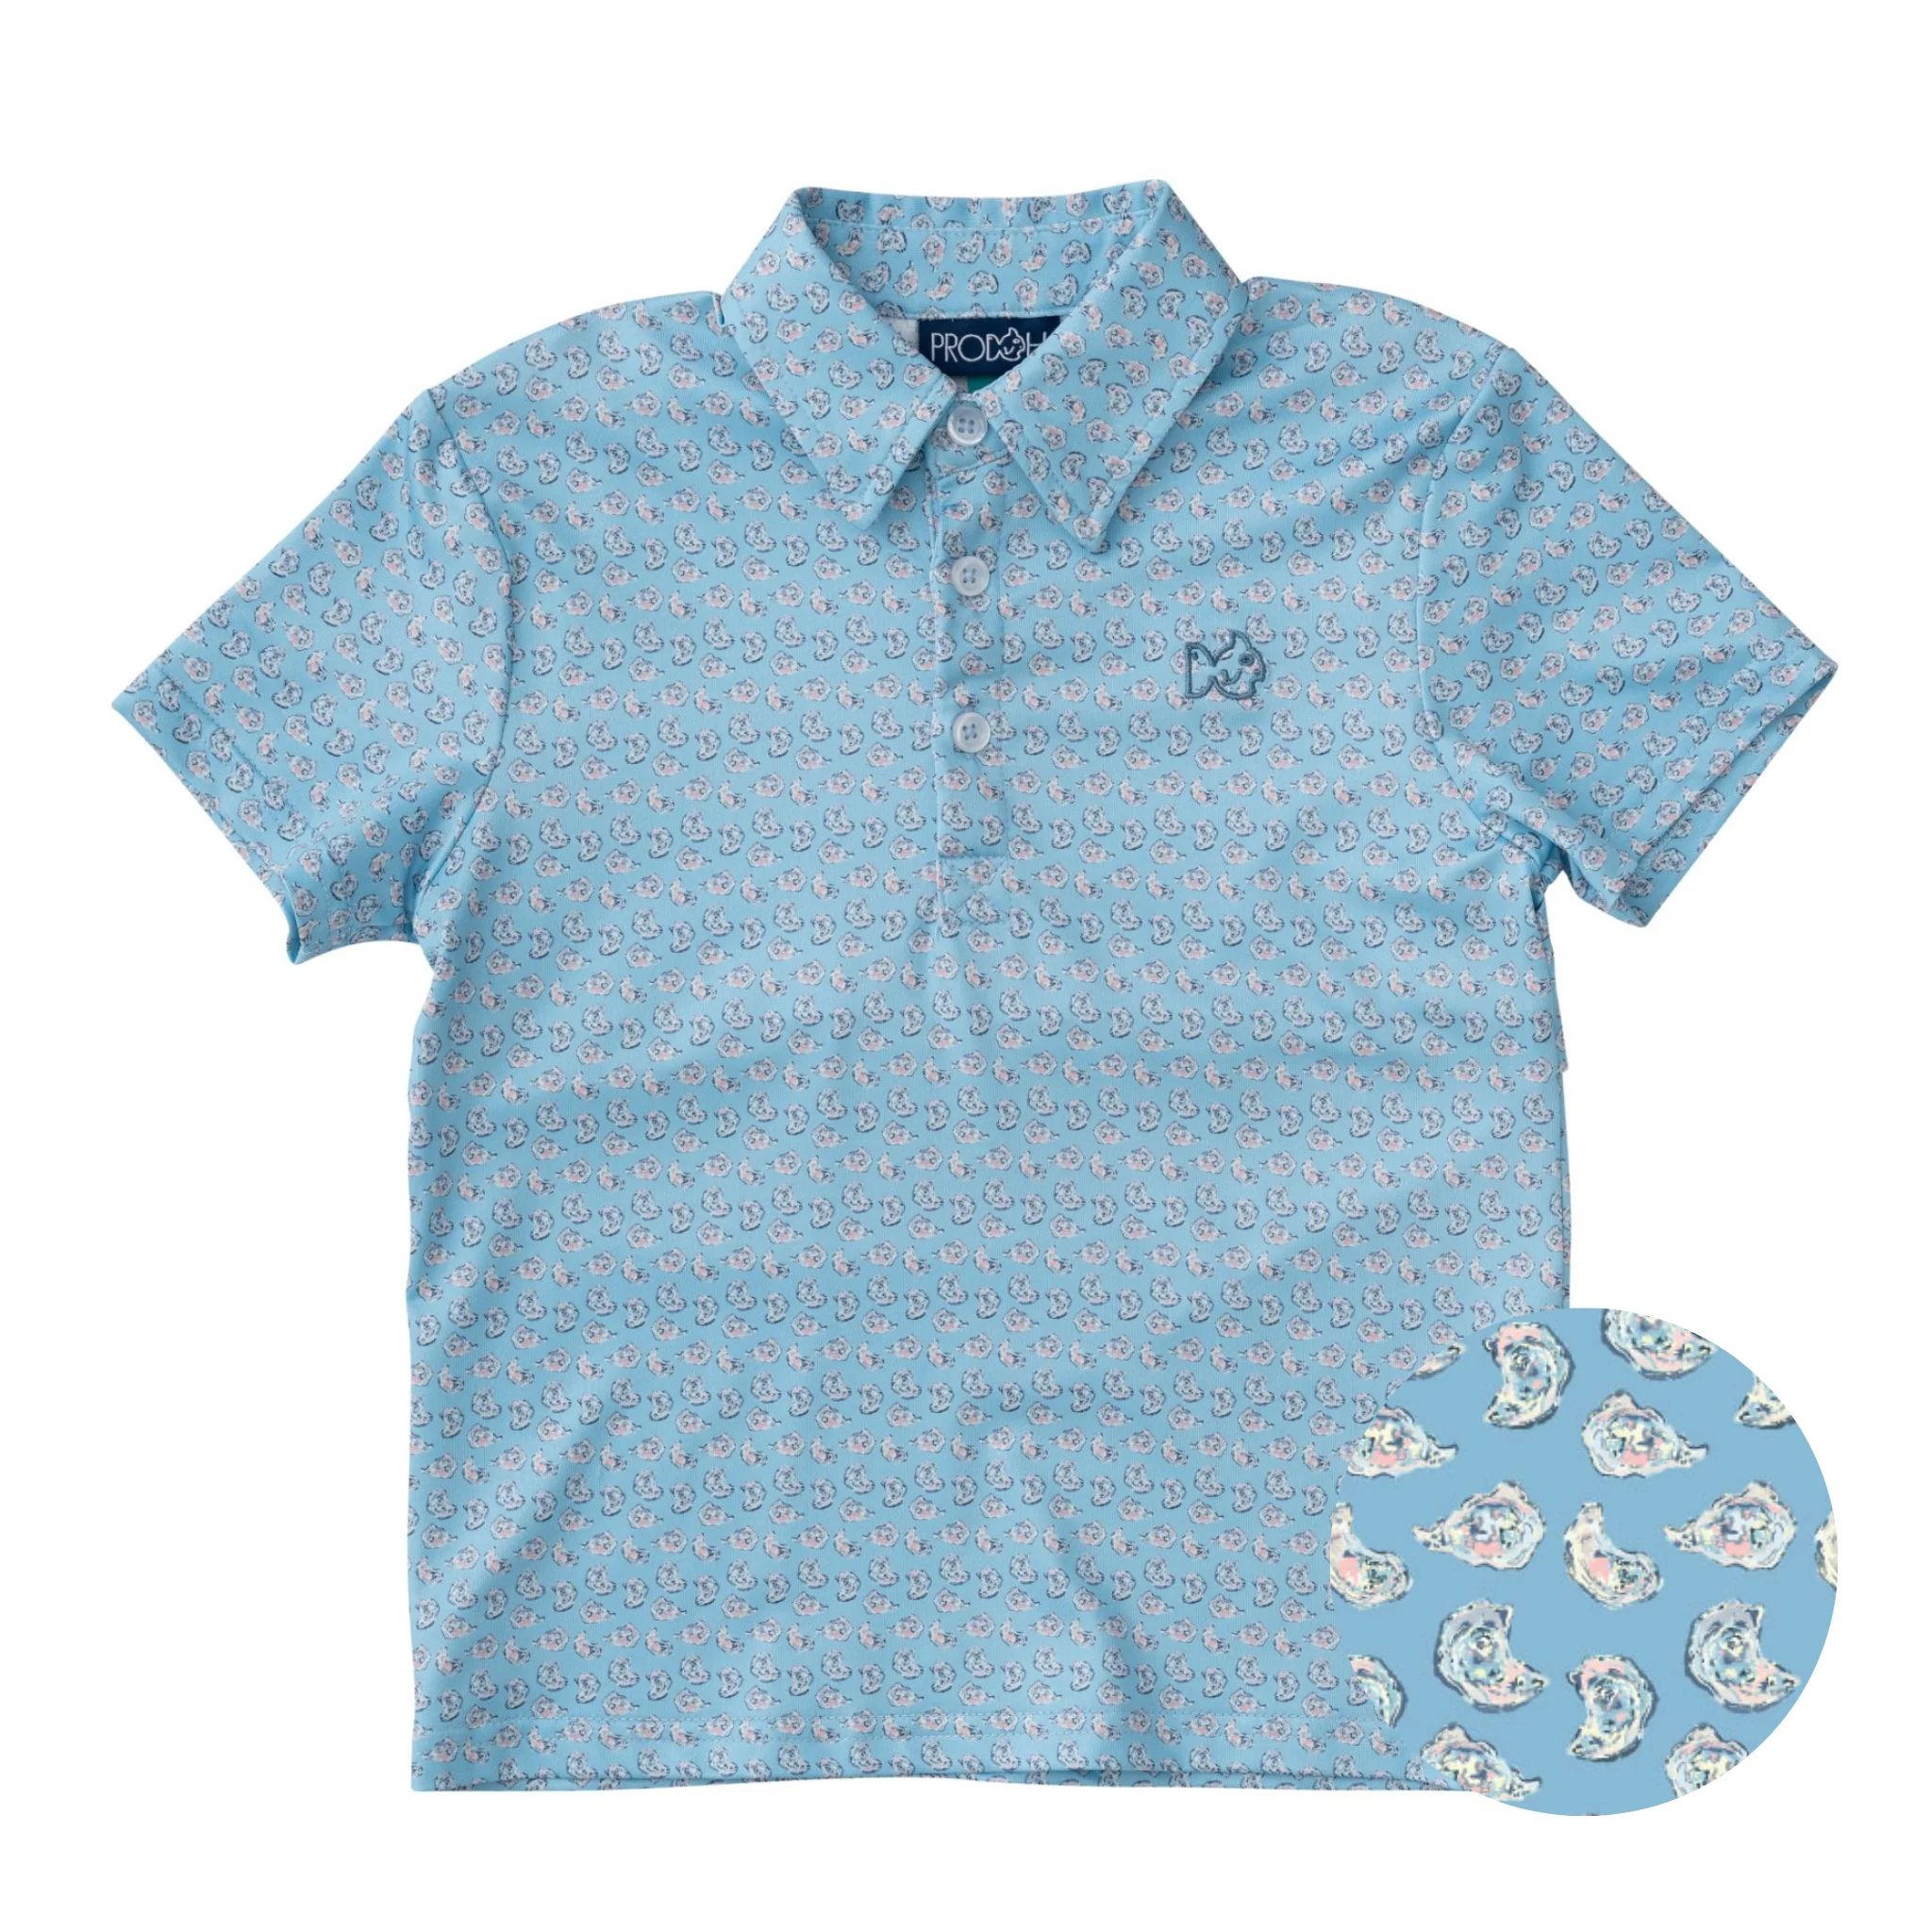 Pro Performance Polo in Oyster Print | PRODOH